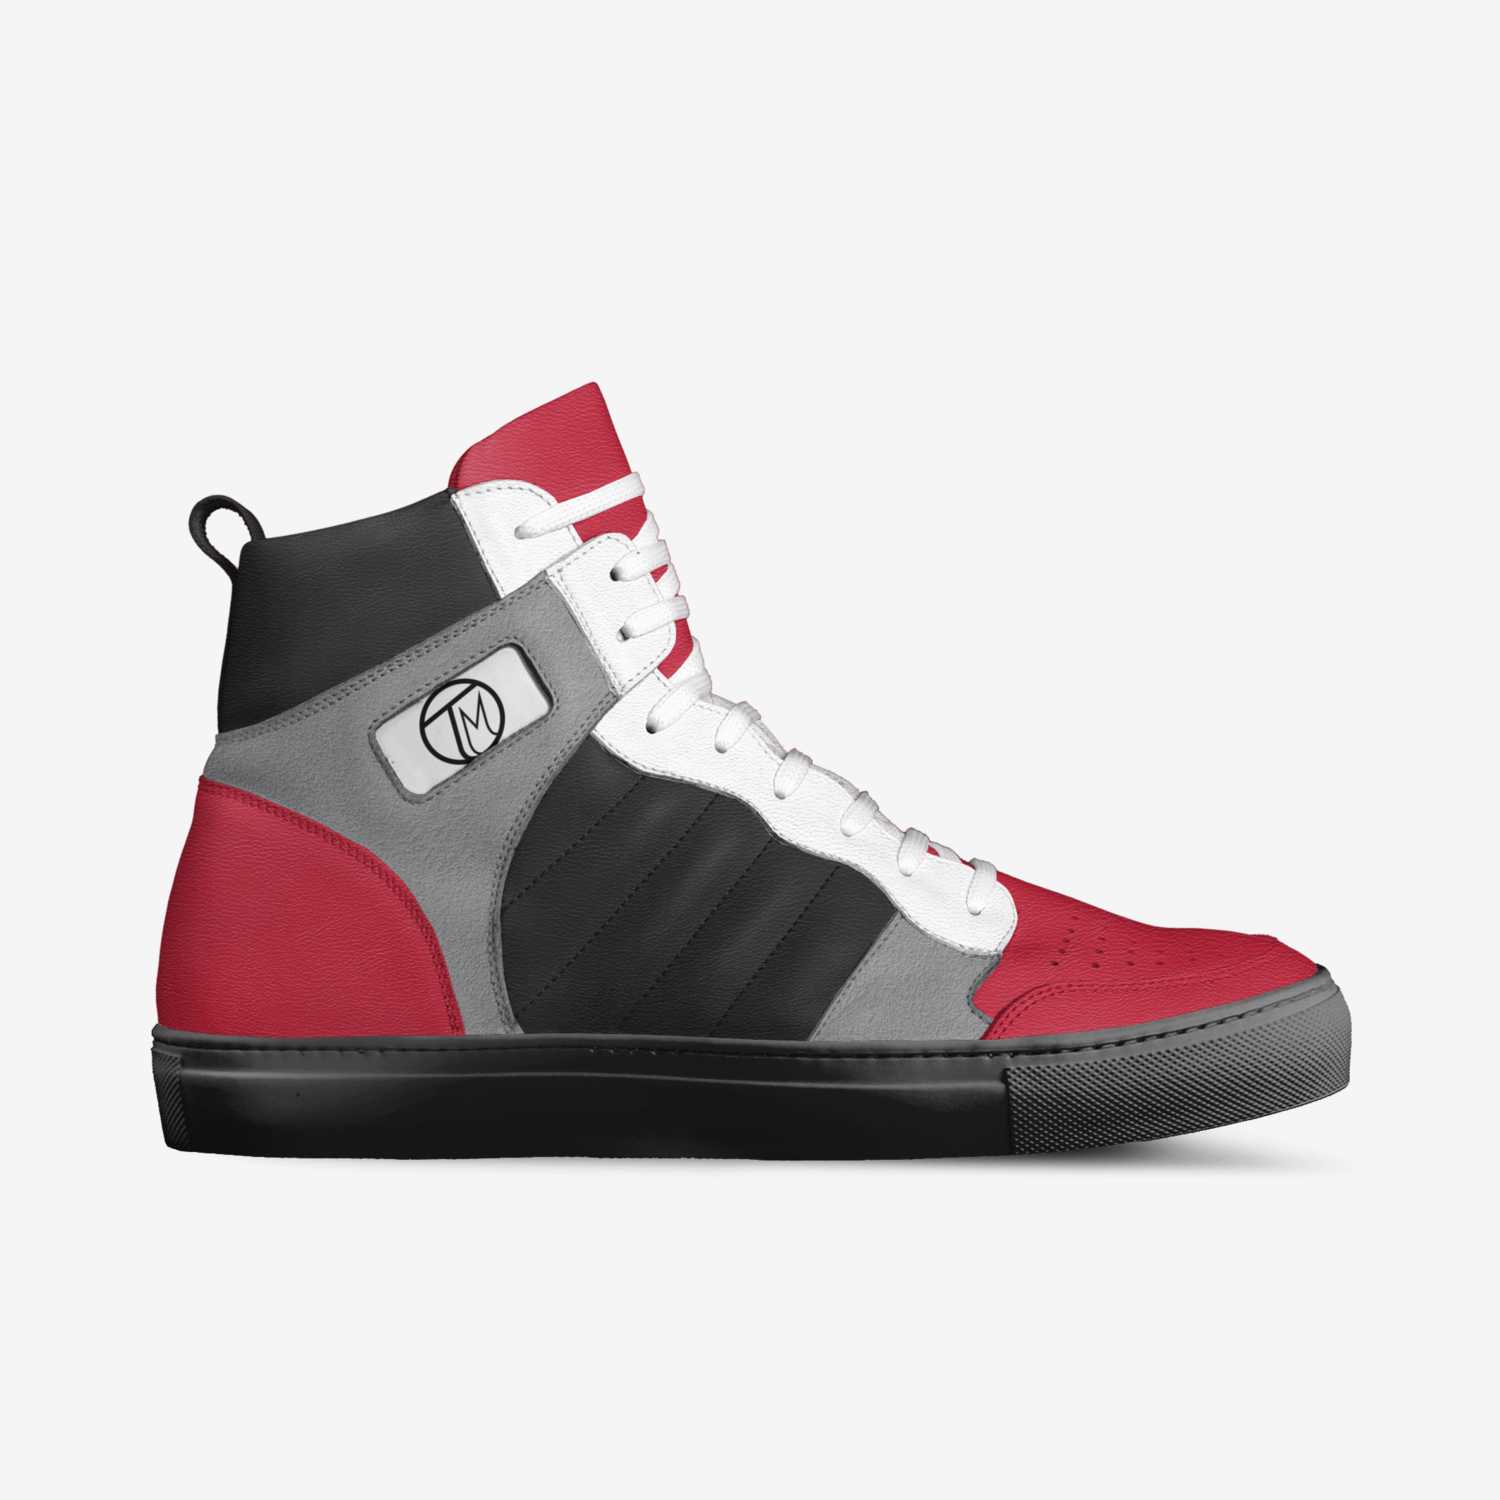  Terrell  Matheny A Custom Shoe concept by Tm Clothing 